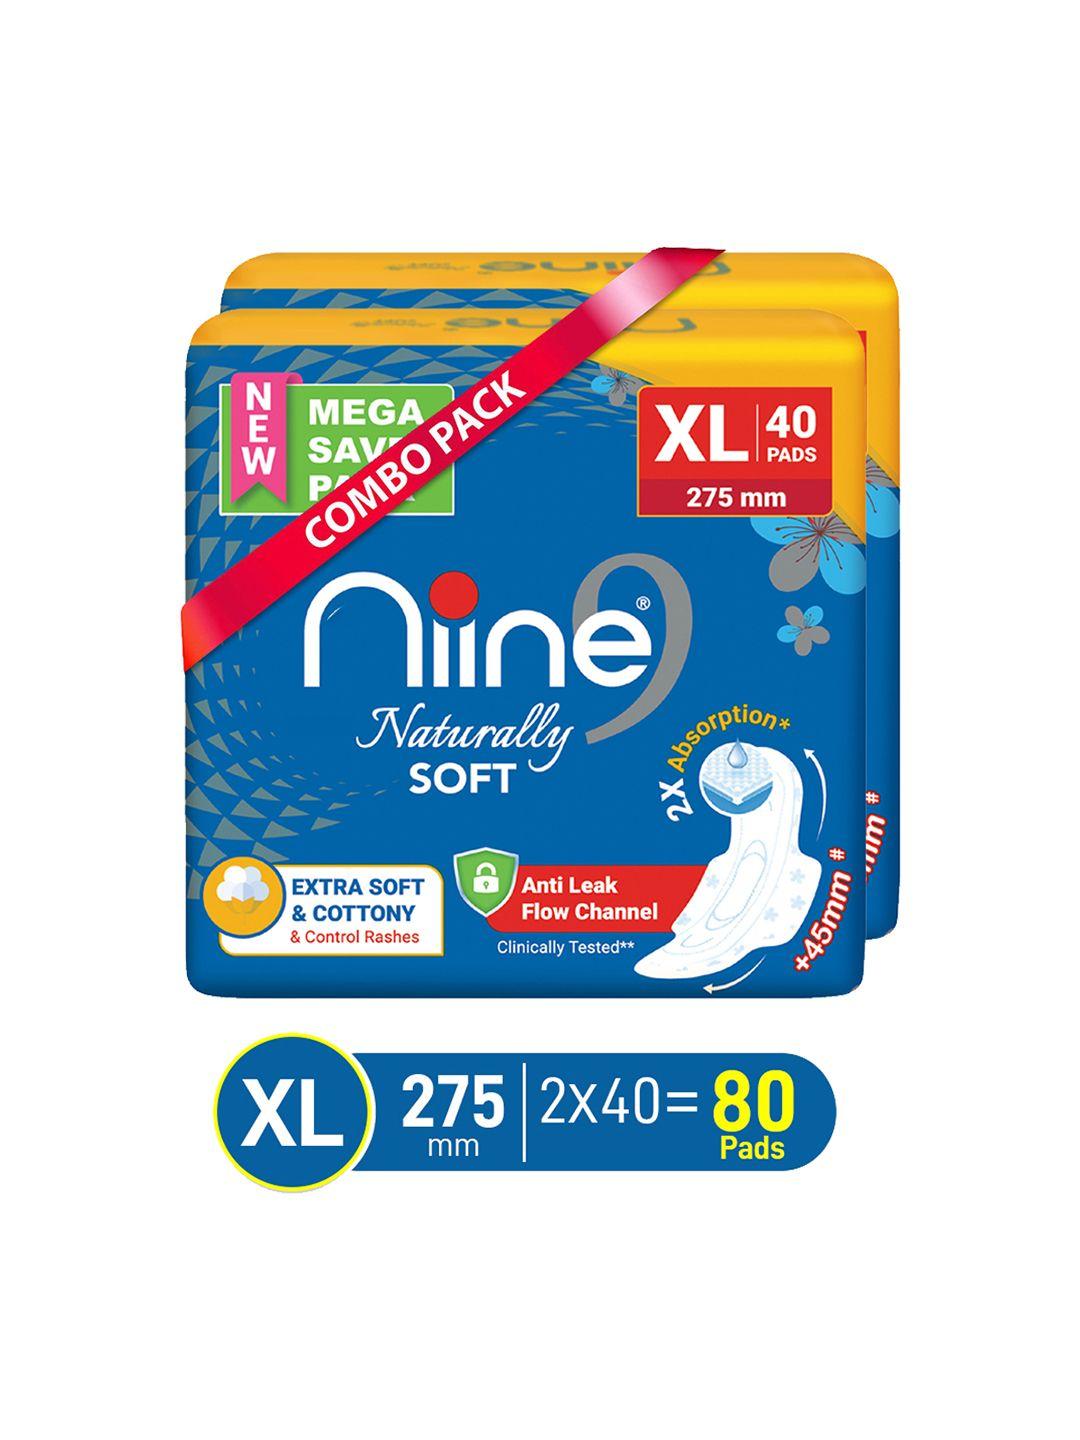 niine set of 2 naturally soft anti leak flow channel xl 275mm sanitary pads - 40 pads each